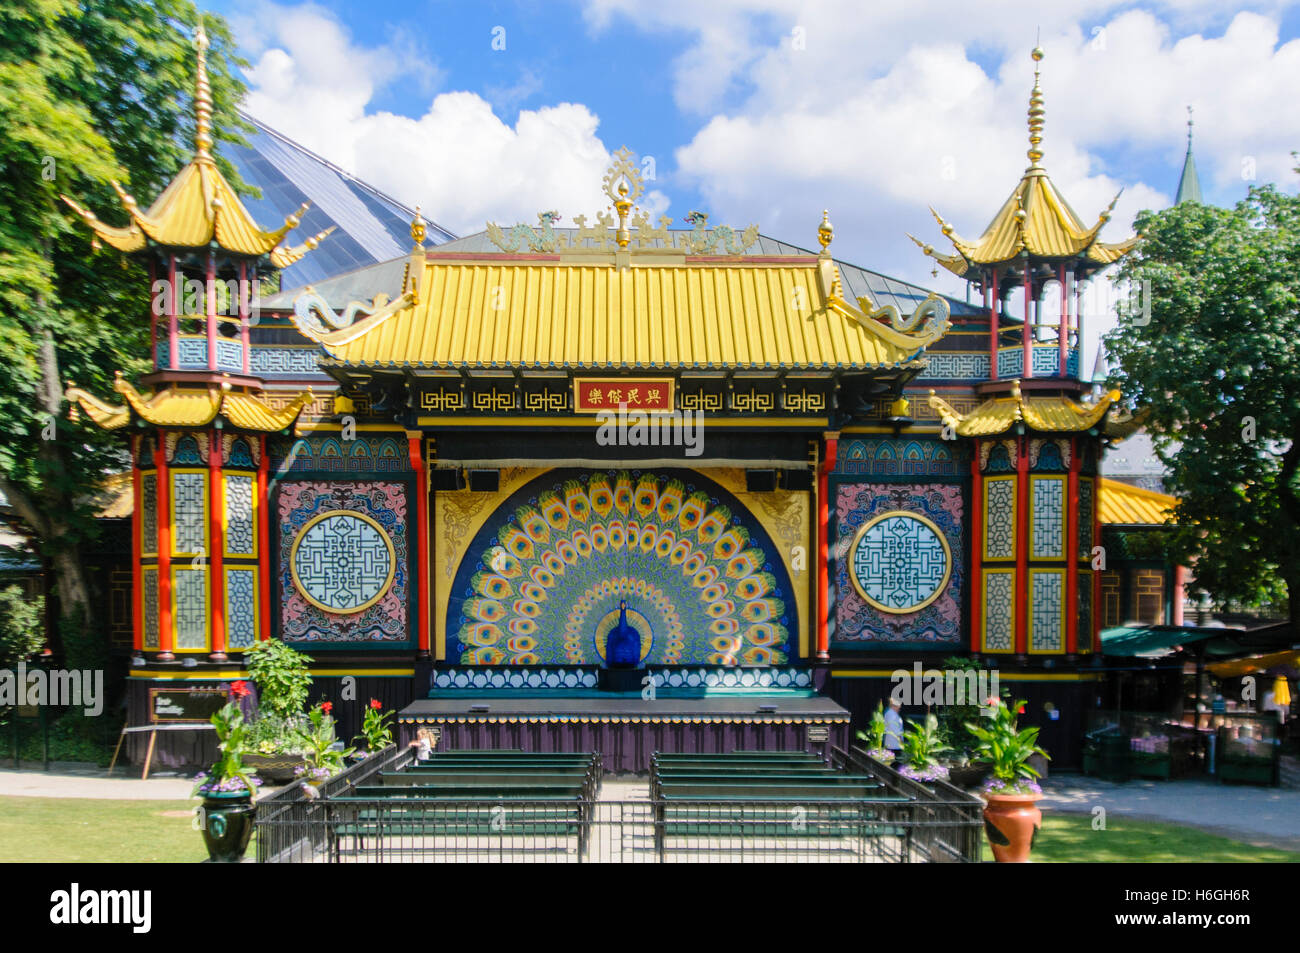 An outdoor Chinese theatre and stage in the Tivoli Gardens, Copenhagen. Stock Photo